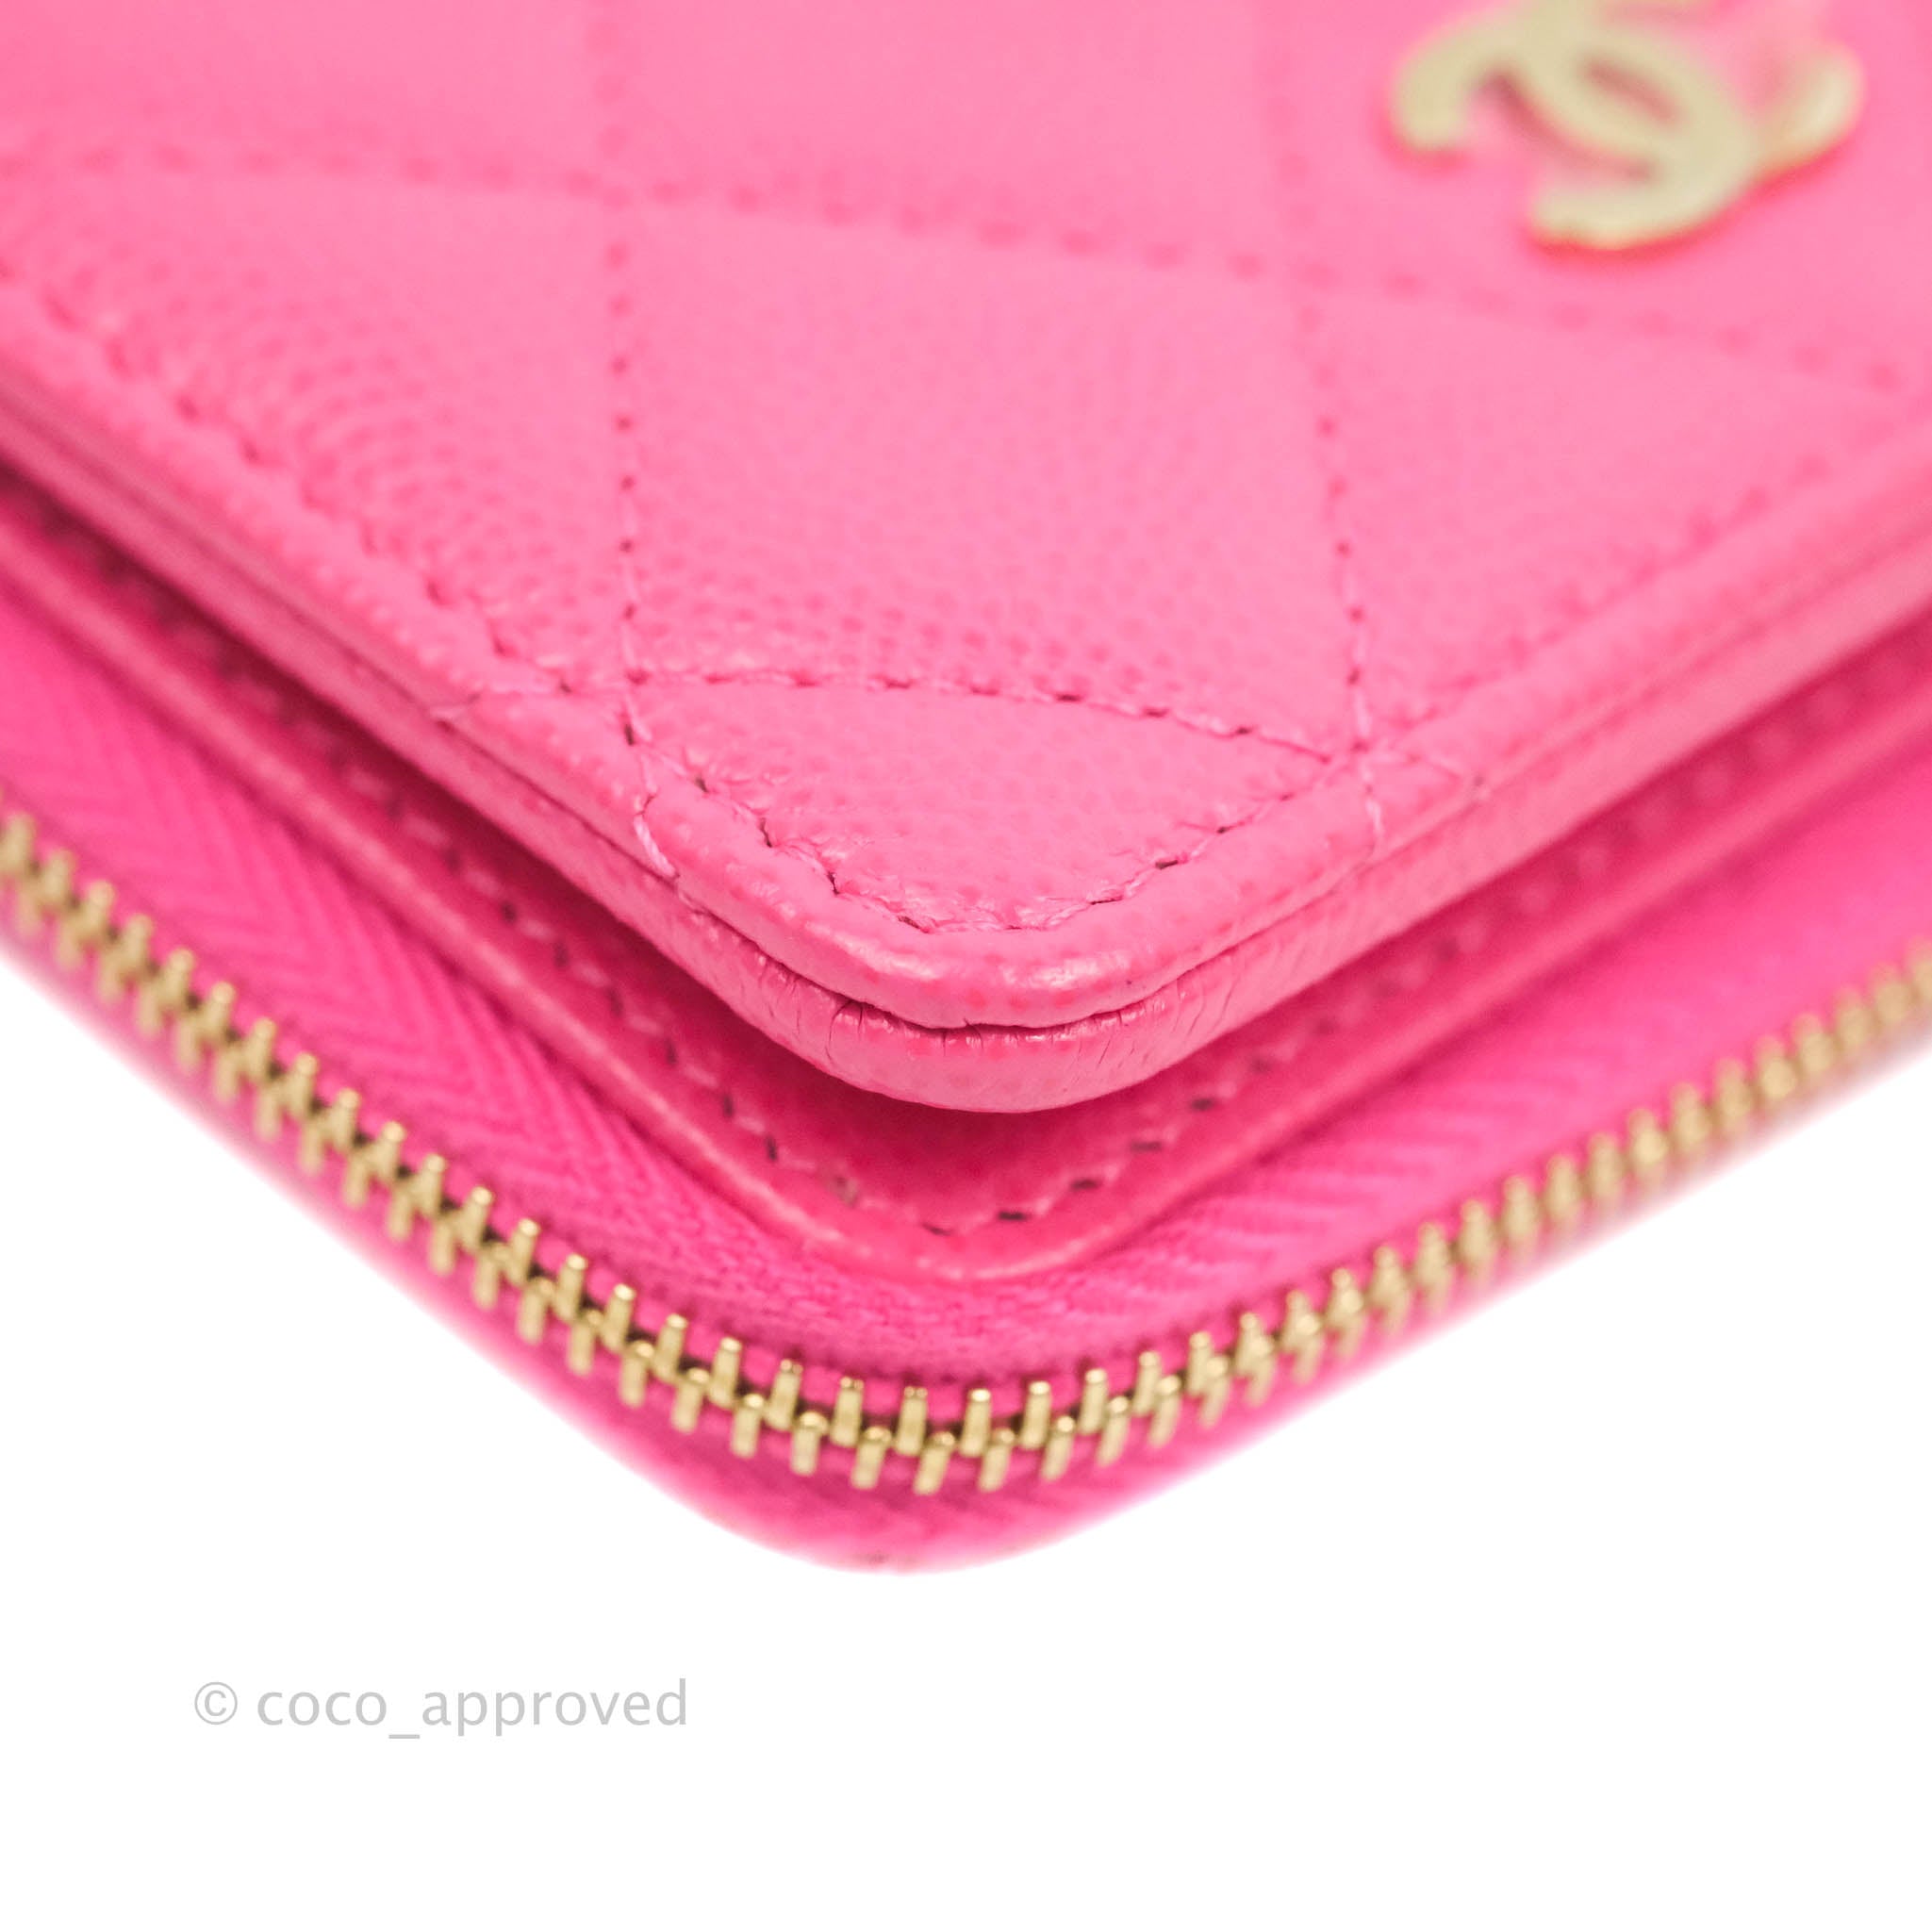 CHANEL Caviar Quilted Zip Coin Purse Pink 1279554